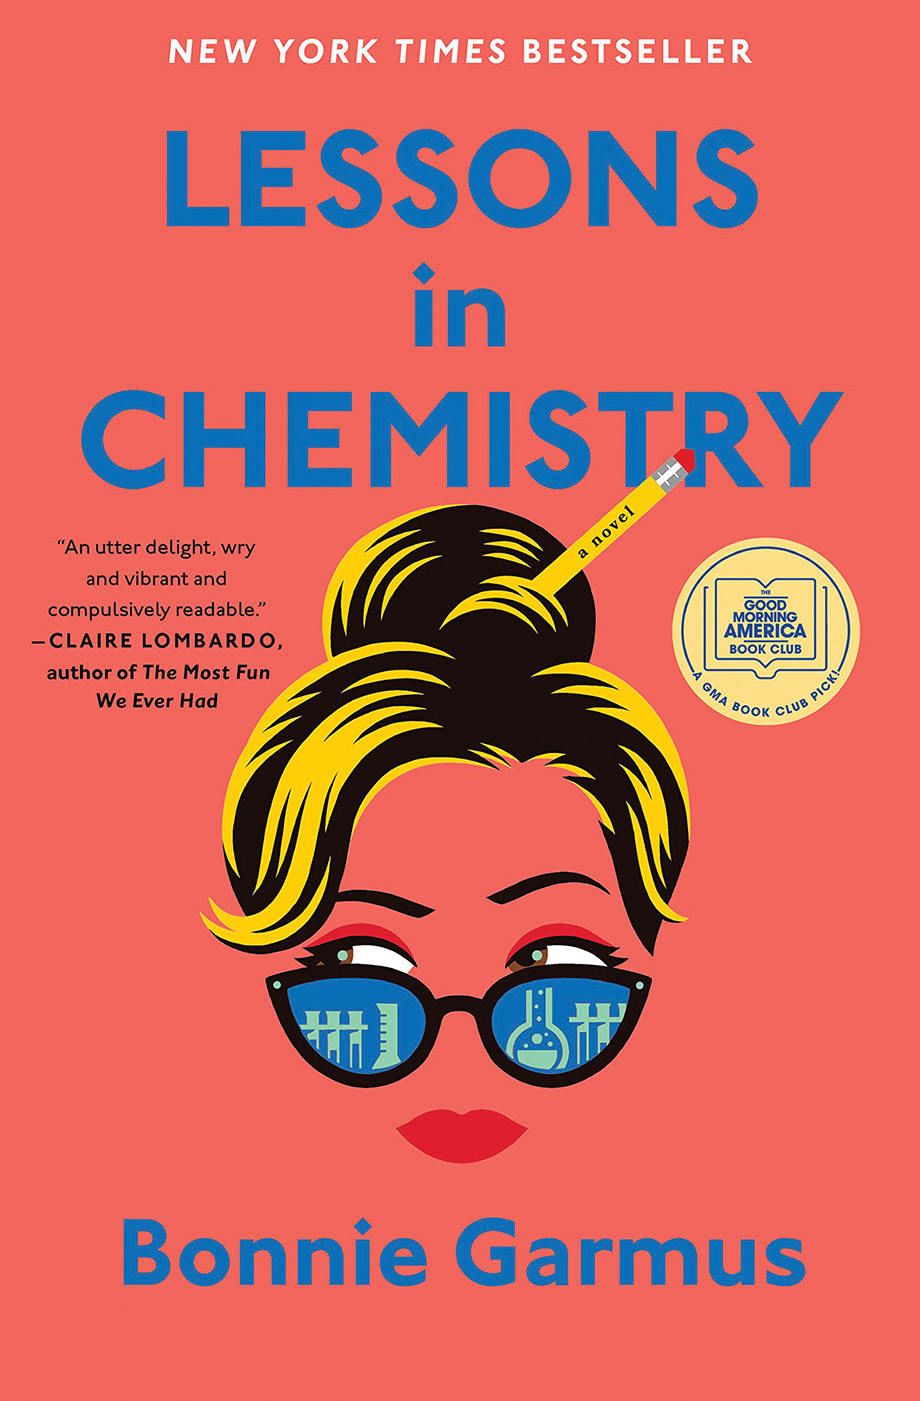 'Lessons in Chemistry' book cover.